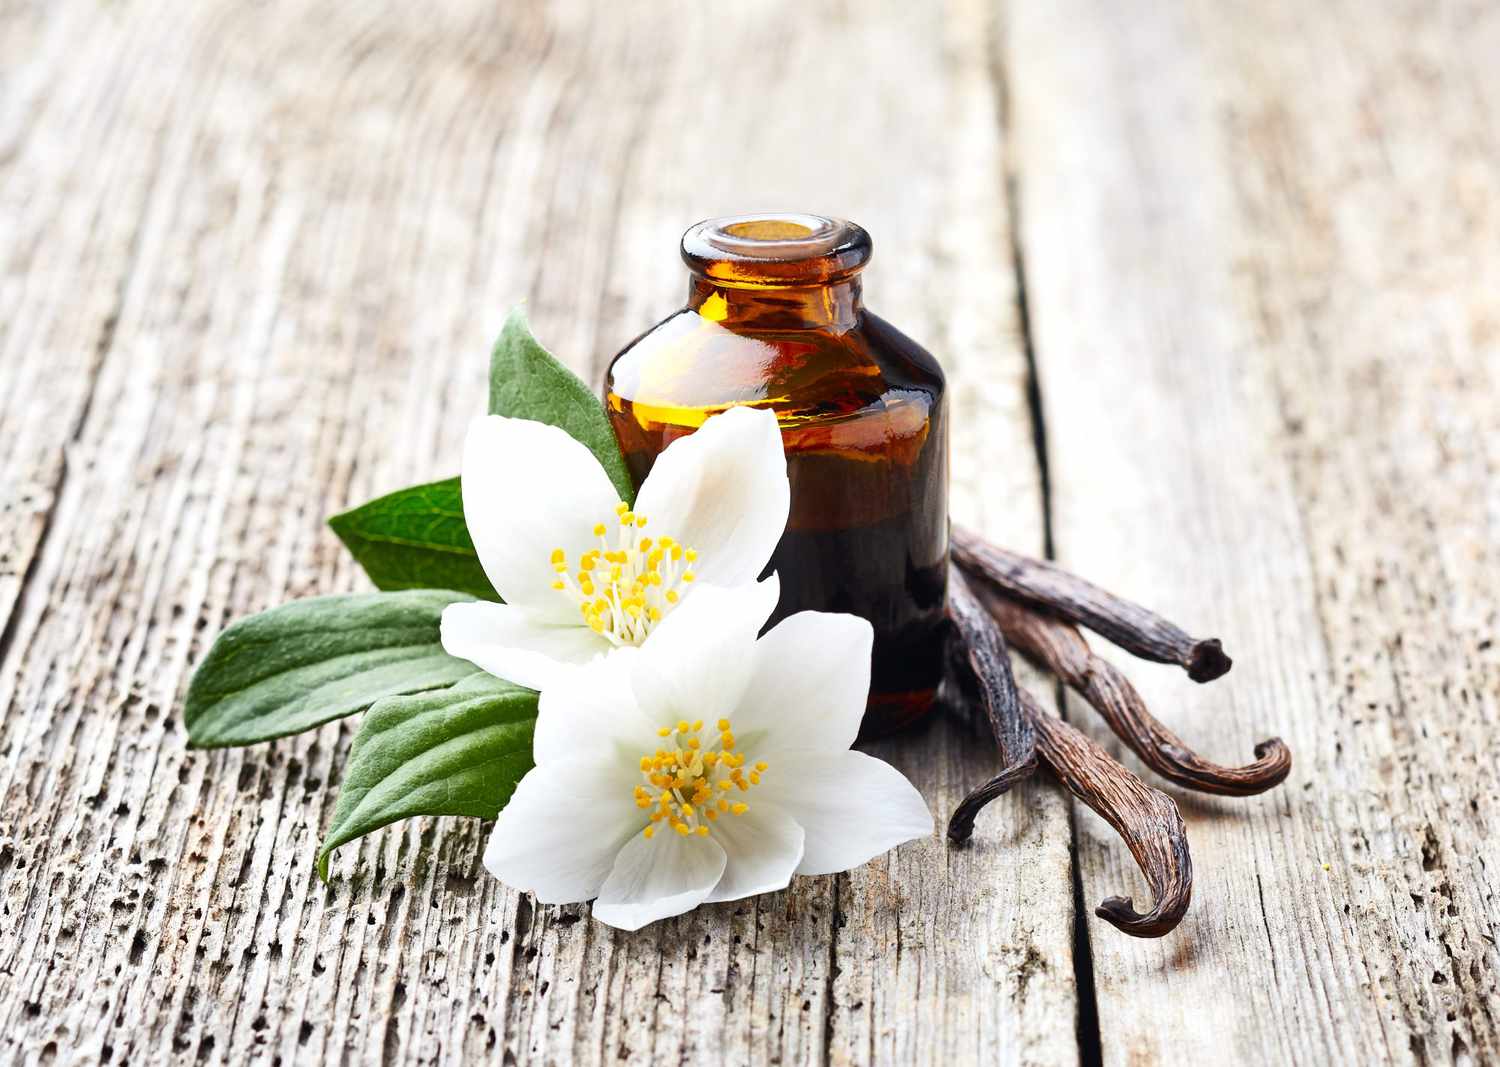 Top 3 Benefits of Using Vanilla in Your Daily Beauty Routine